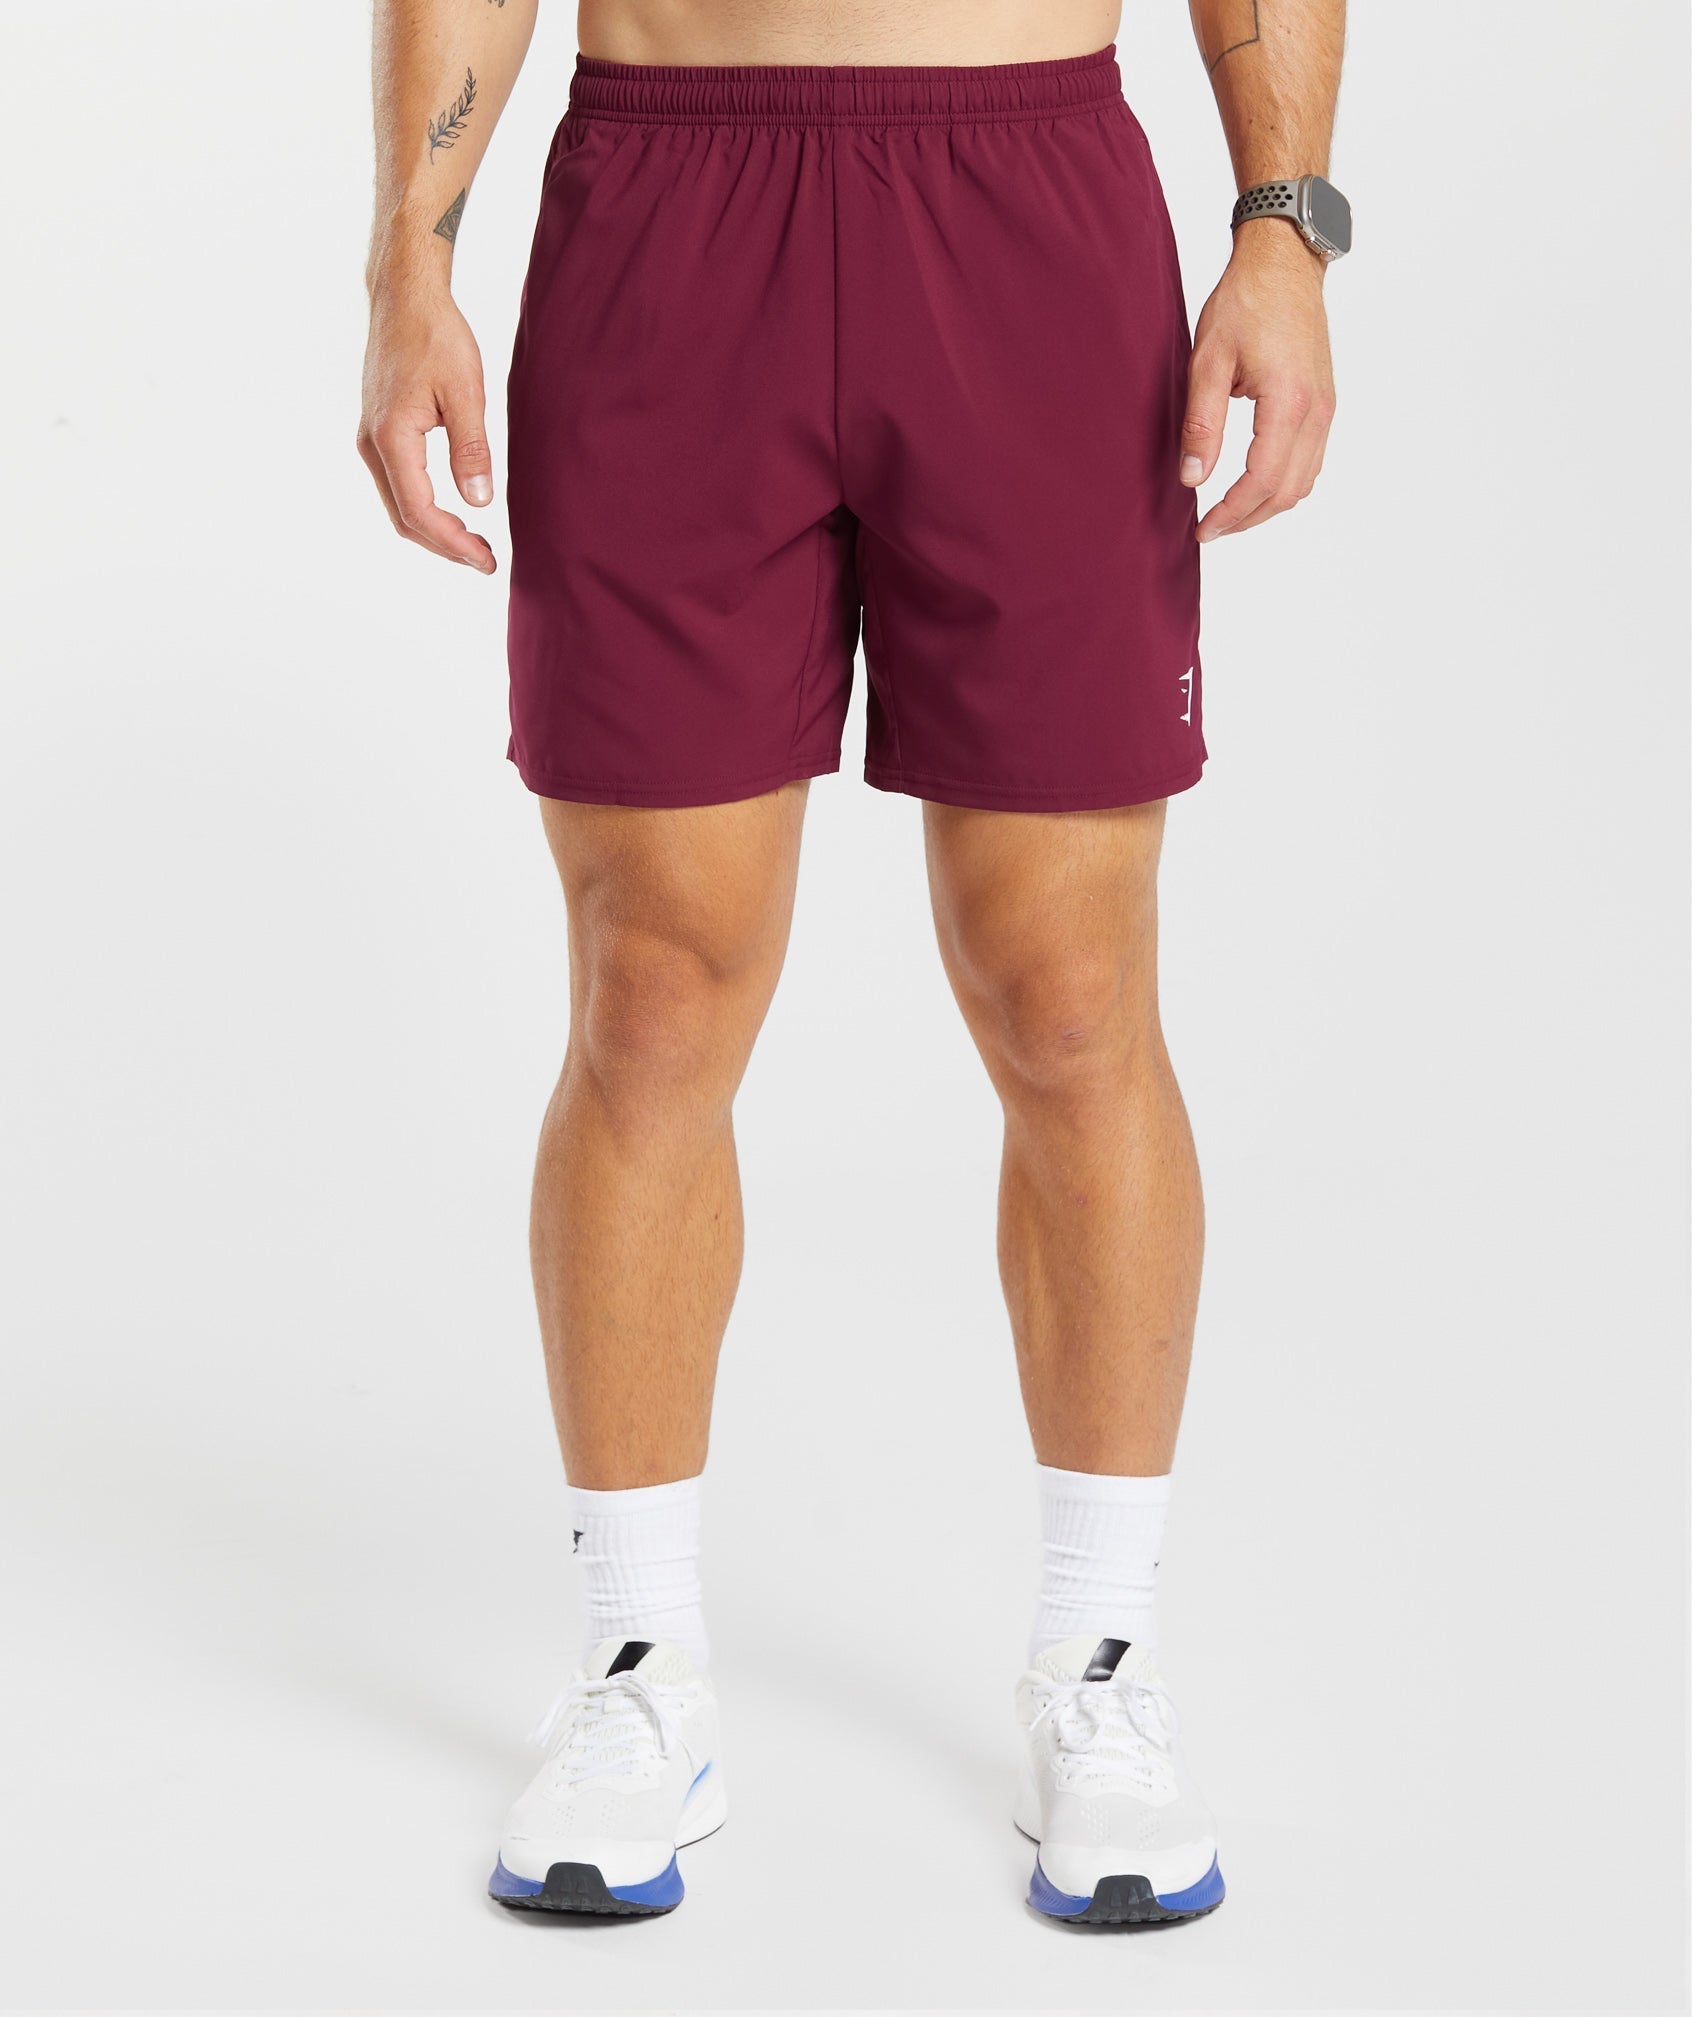 Arrival 7" Shorts in Plum Pink - view 1